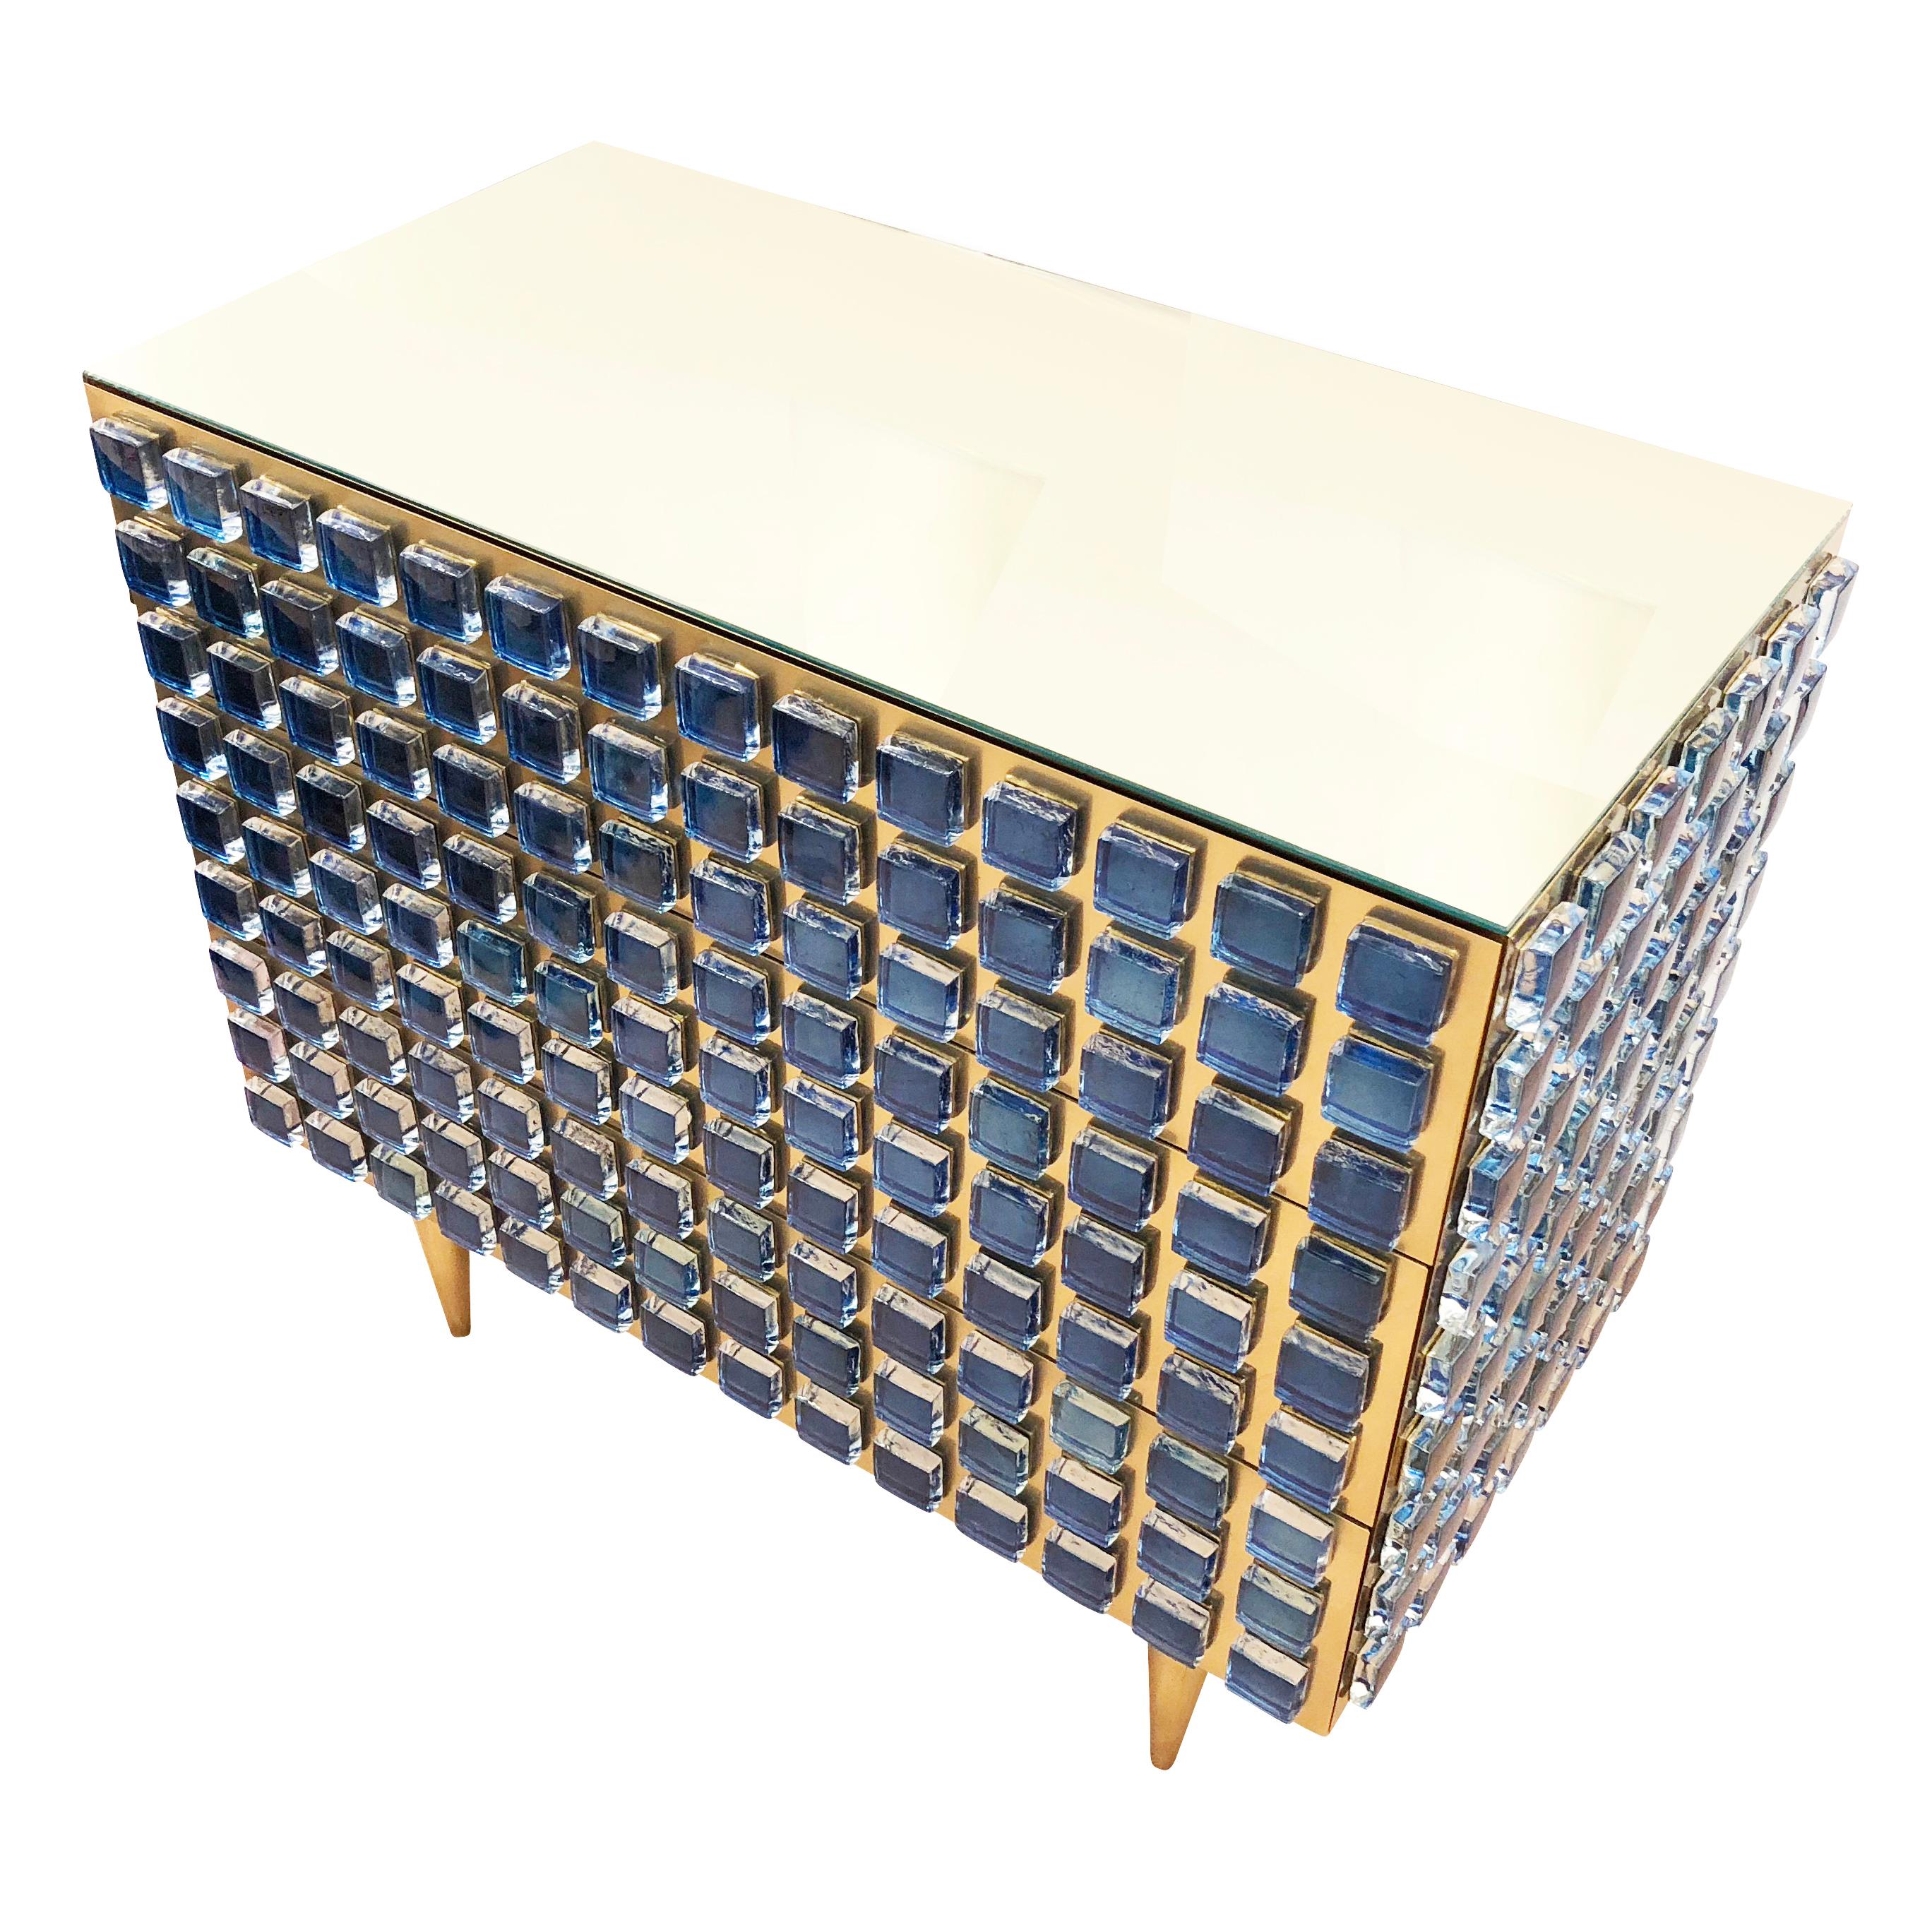 Interno 43 chest of drawers or cabinet made for Gaspare Asaro’s studio line, formA. Each piece is handmade in Italy and composed of brass paneling, dozens of colored glass medallions and a clear glass top. The model shown is a chest with three